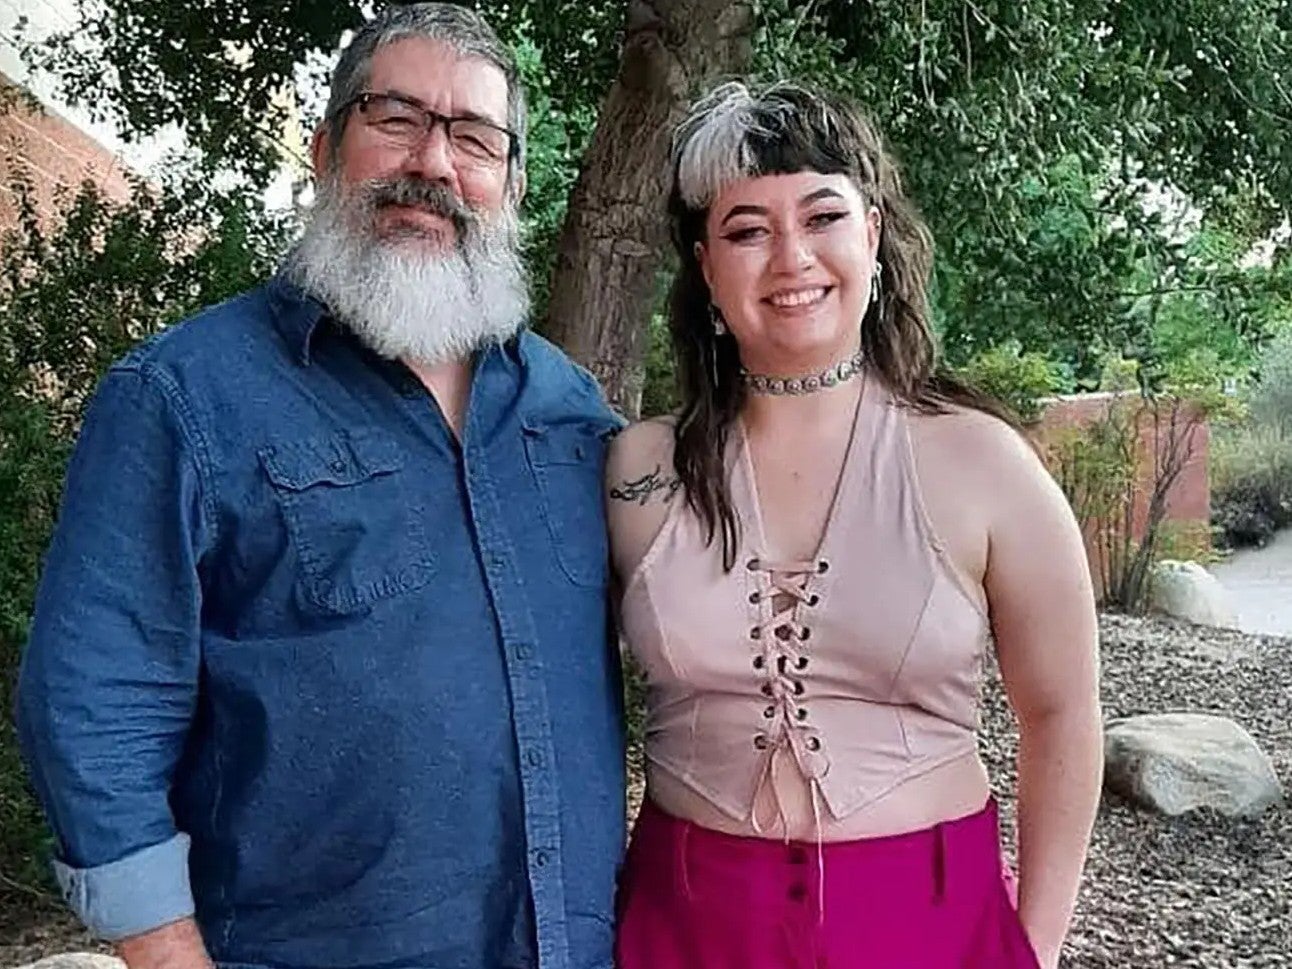 McKenna Evans, 22, and her father, Ken Evans, were killed after being attacked in the parking lot of a Kohl’s department store in Palmdale, north of Los Angeles